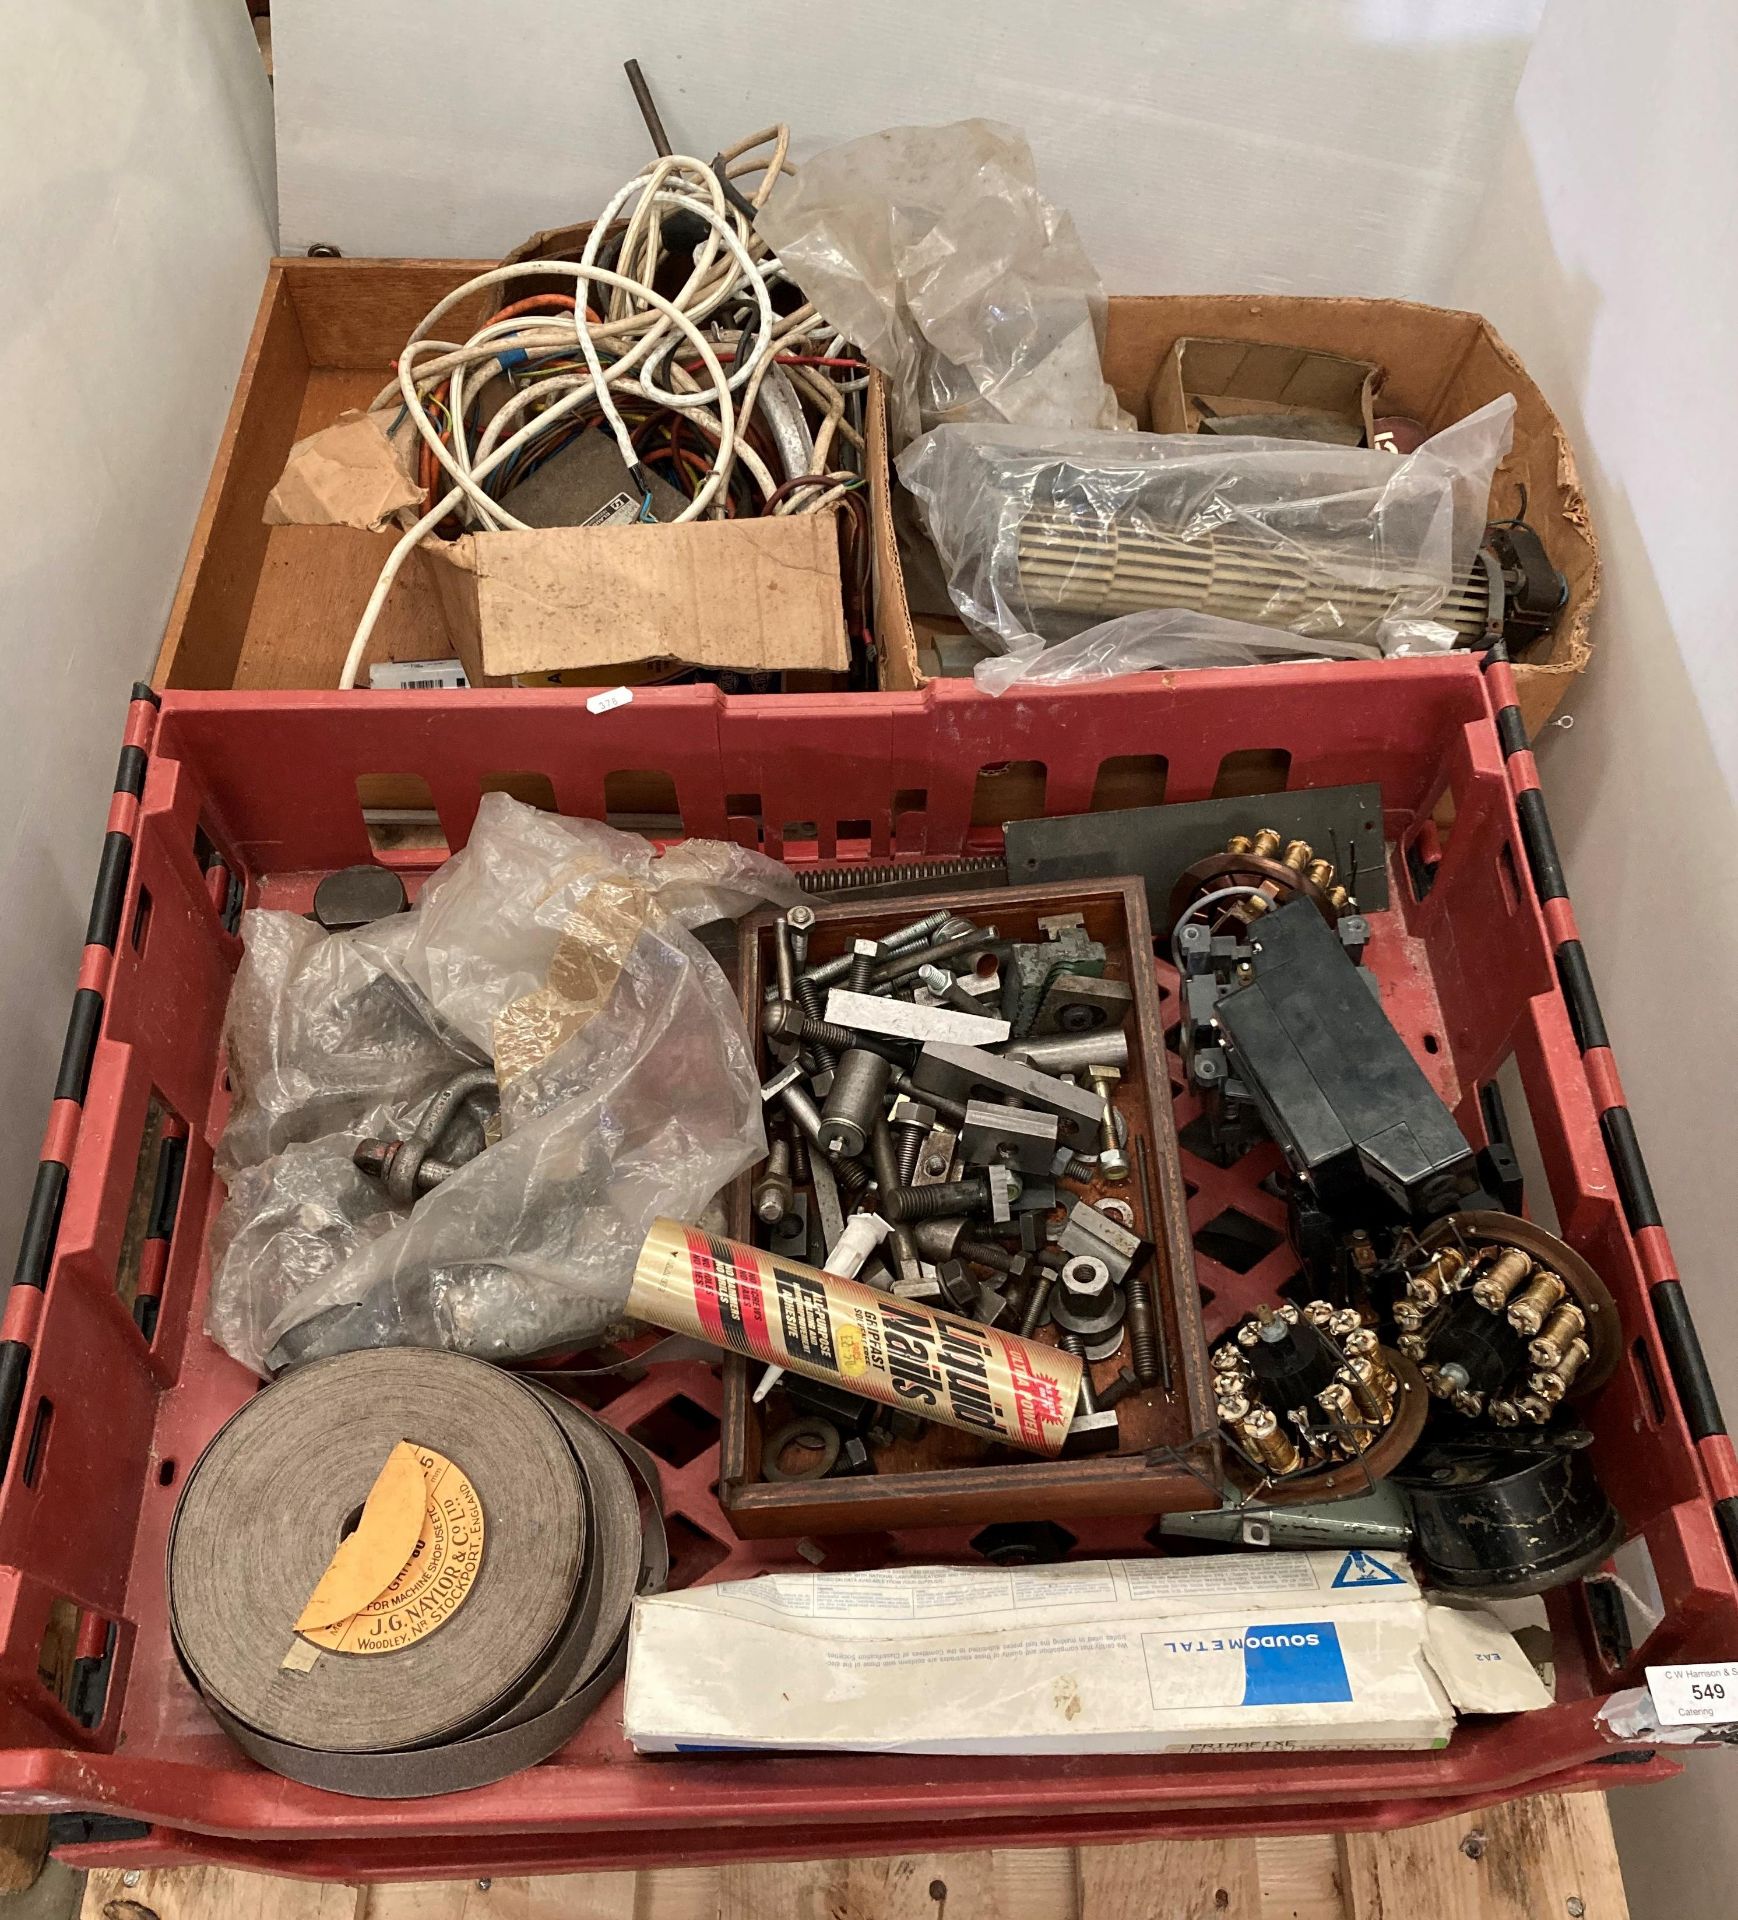 Contents to pallet - assorted brass fittings, brass off-cuts, nuts, bolts, parts etc.